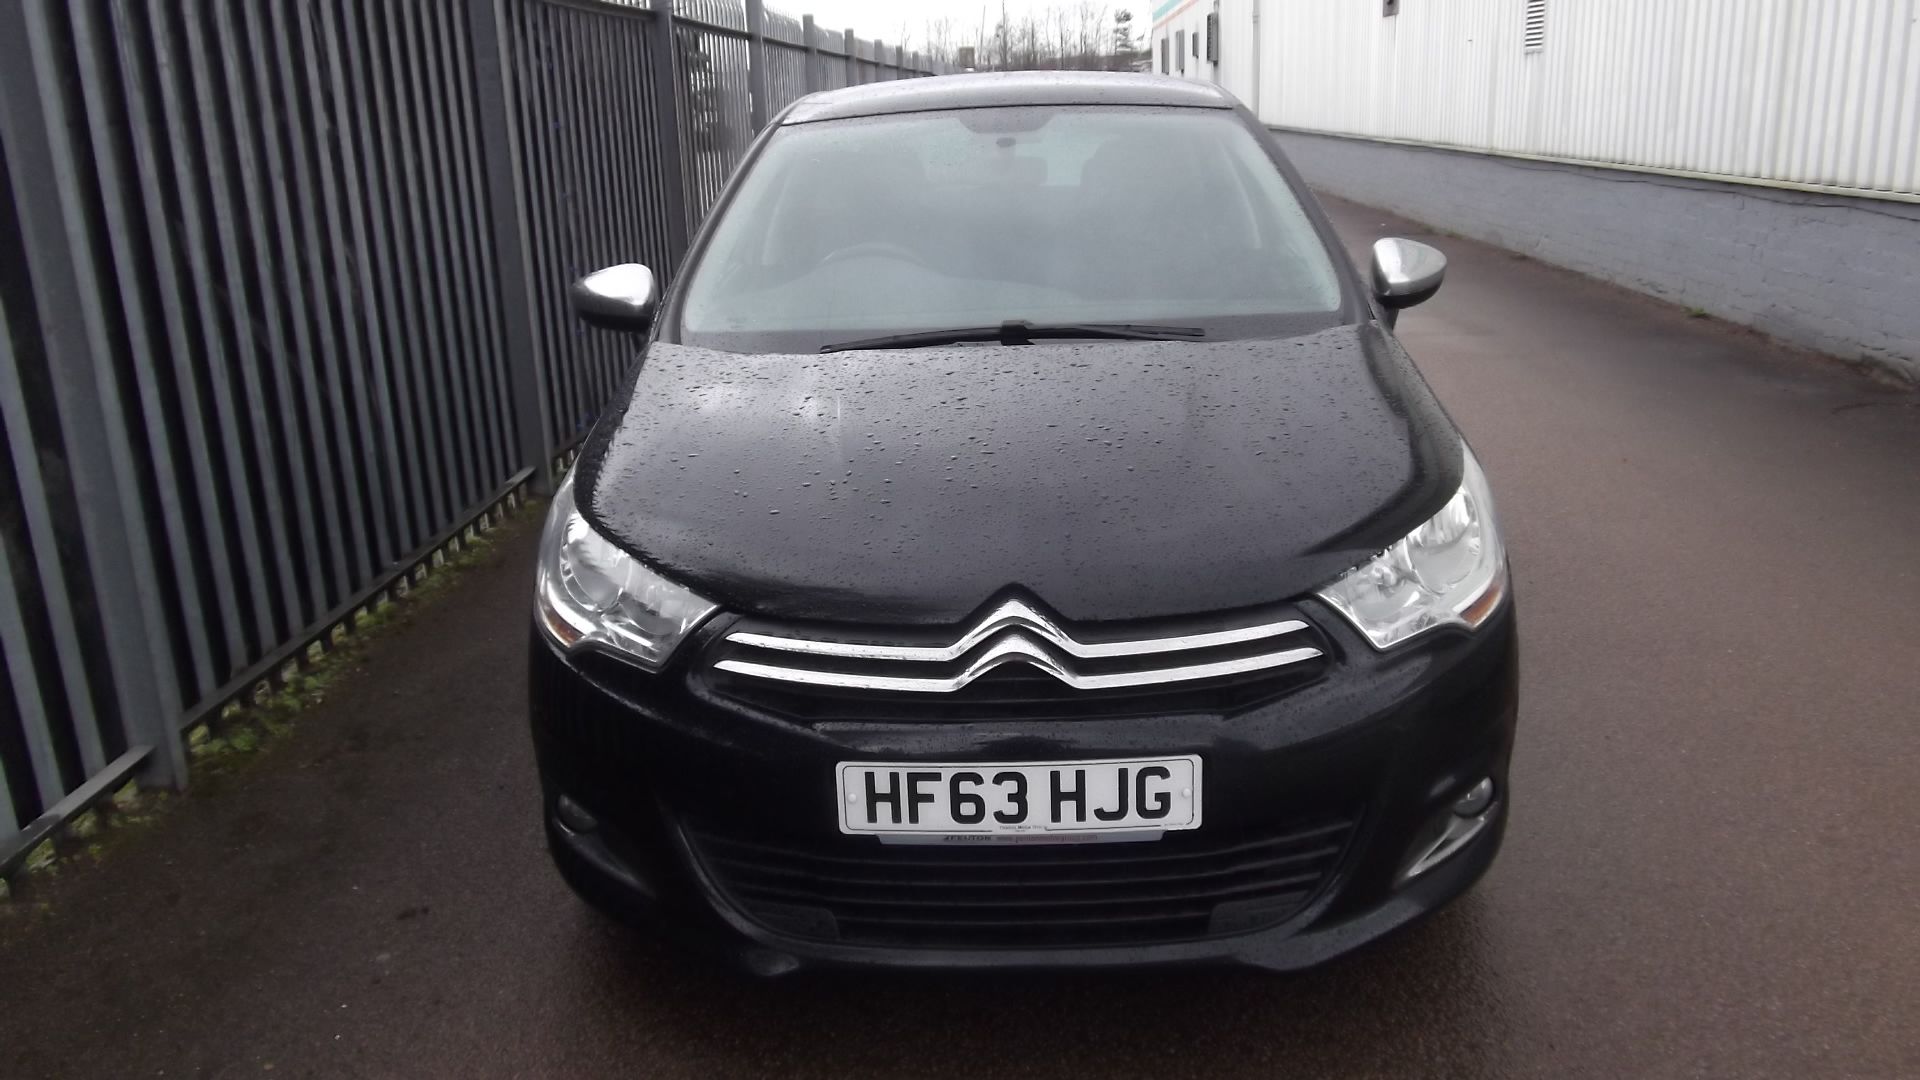 2013 Citroen C4 Selection Airdream E-Hdi 1.6 5Dr Hatchback - CL505 - NO VAT ON THE HAMM - Image 7 of 22